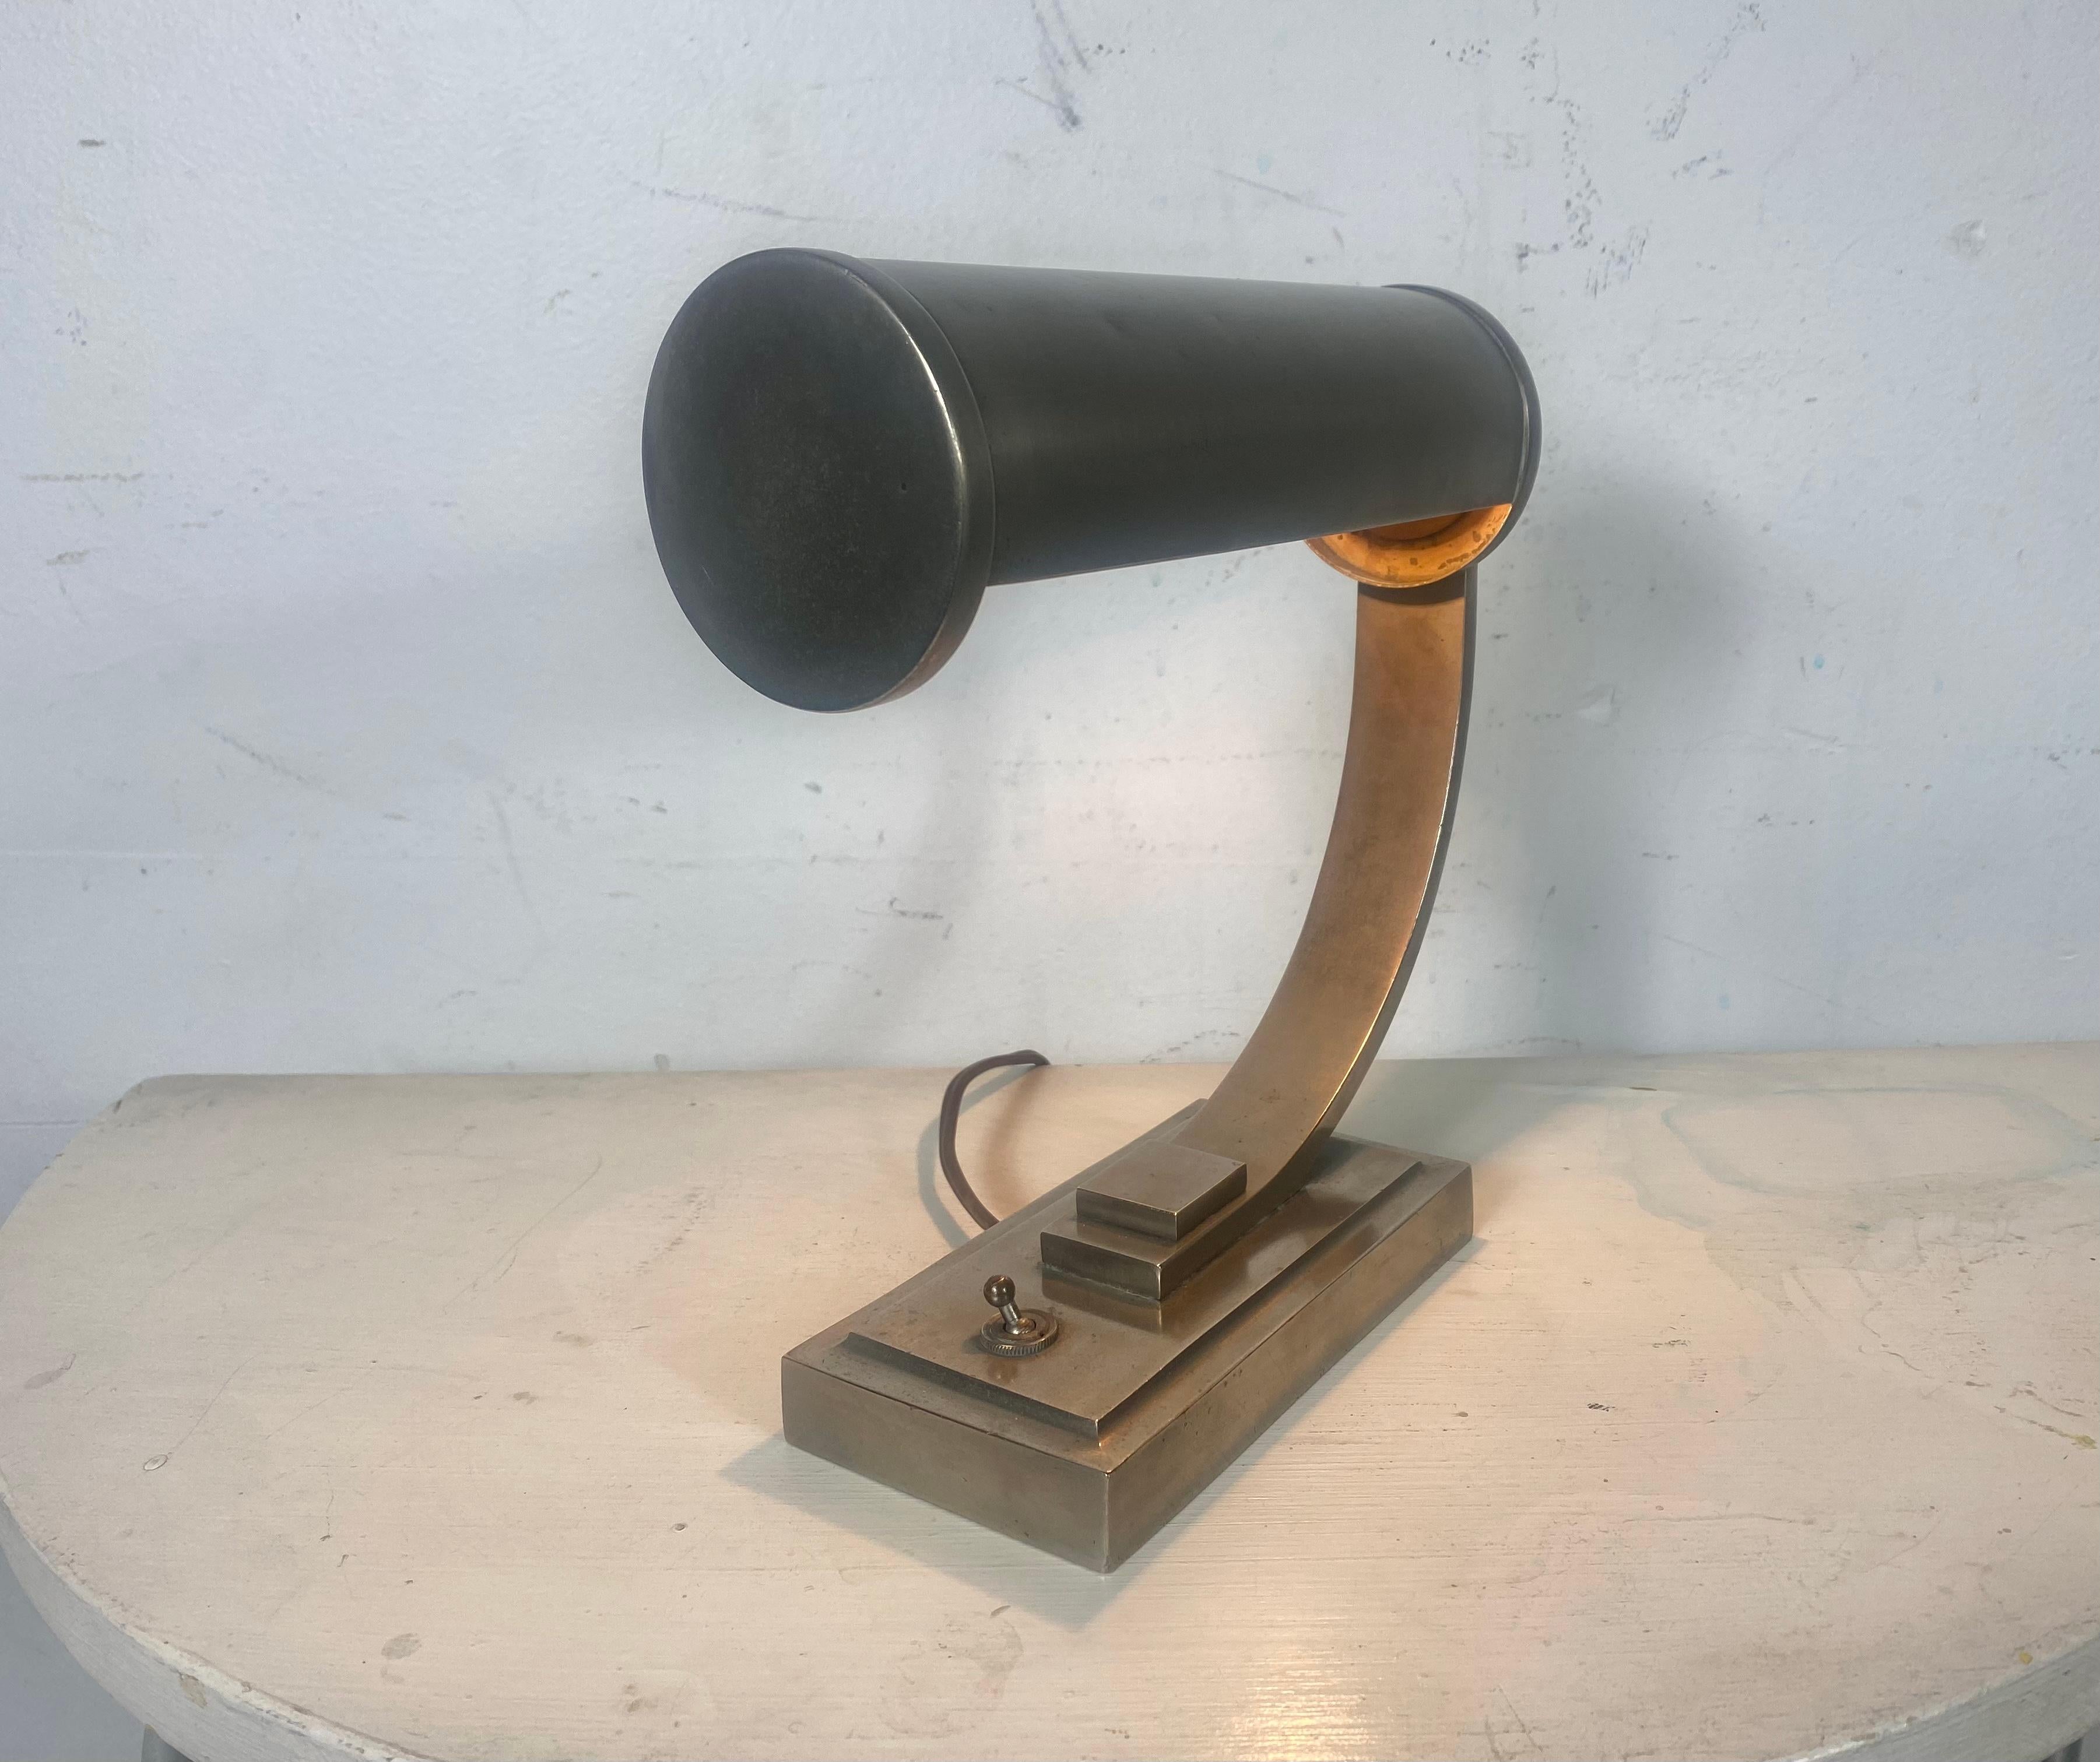 Rare Example, Bauhaus / Art Deco Desk Lamp Designed by Gilbert Rohde In Good Condition For Sale In Buffalo, NY